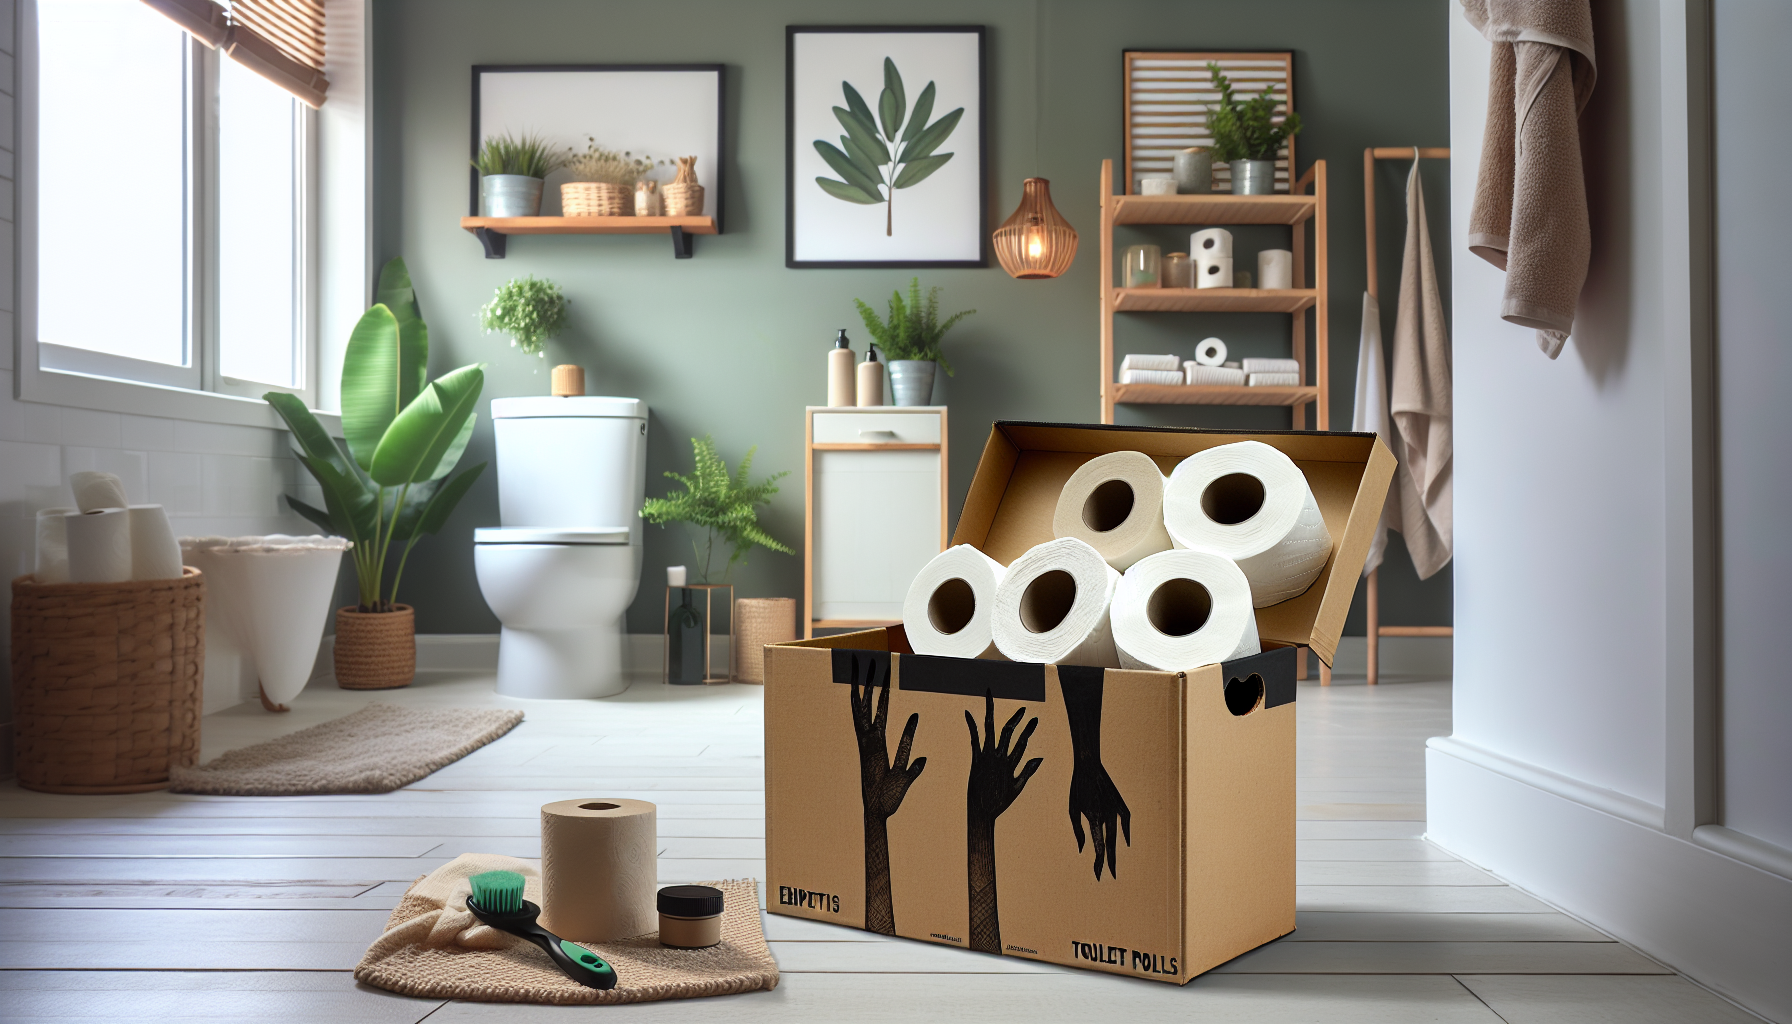 Turn a shoebox into a trendy, eco-friendly toilet paper holder